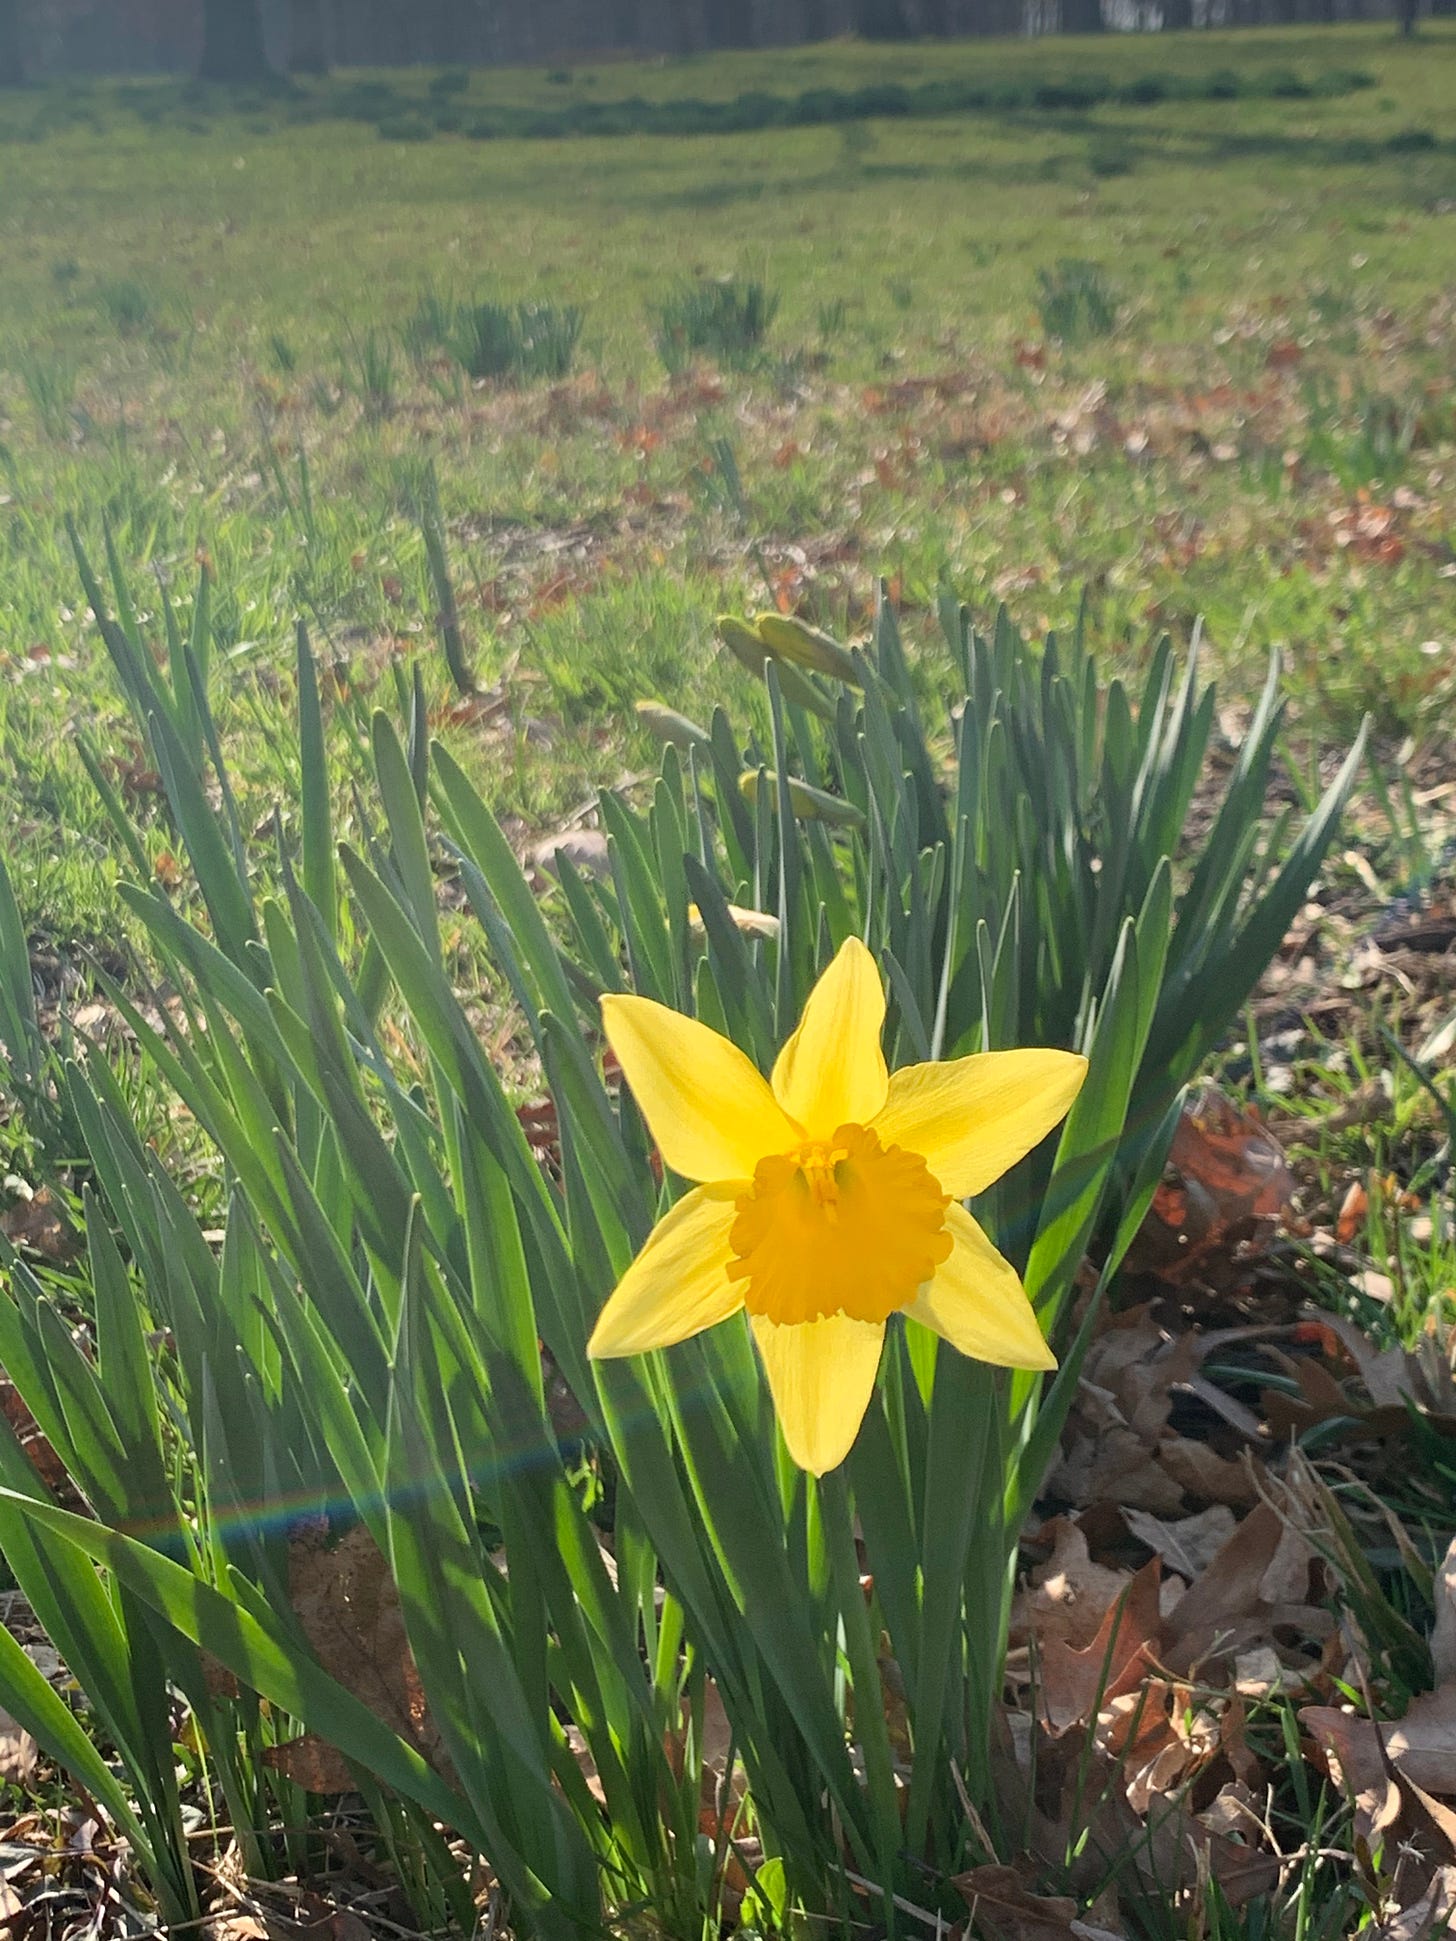 Bright yellow Narcissus (Daffodil) is the first to bloom in a clump on a meadow